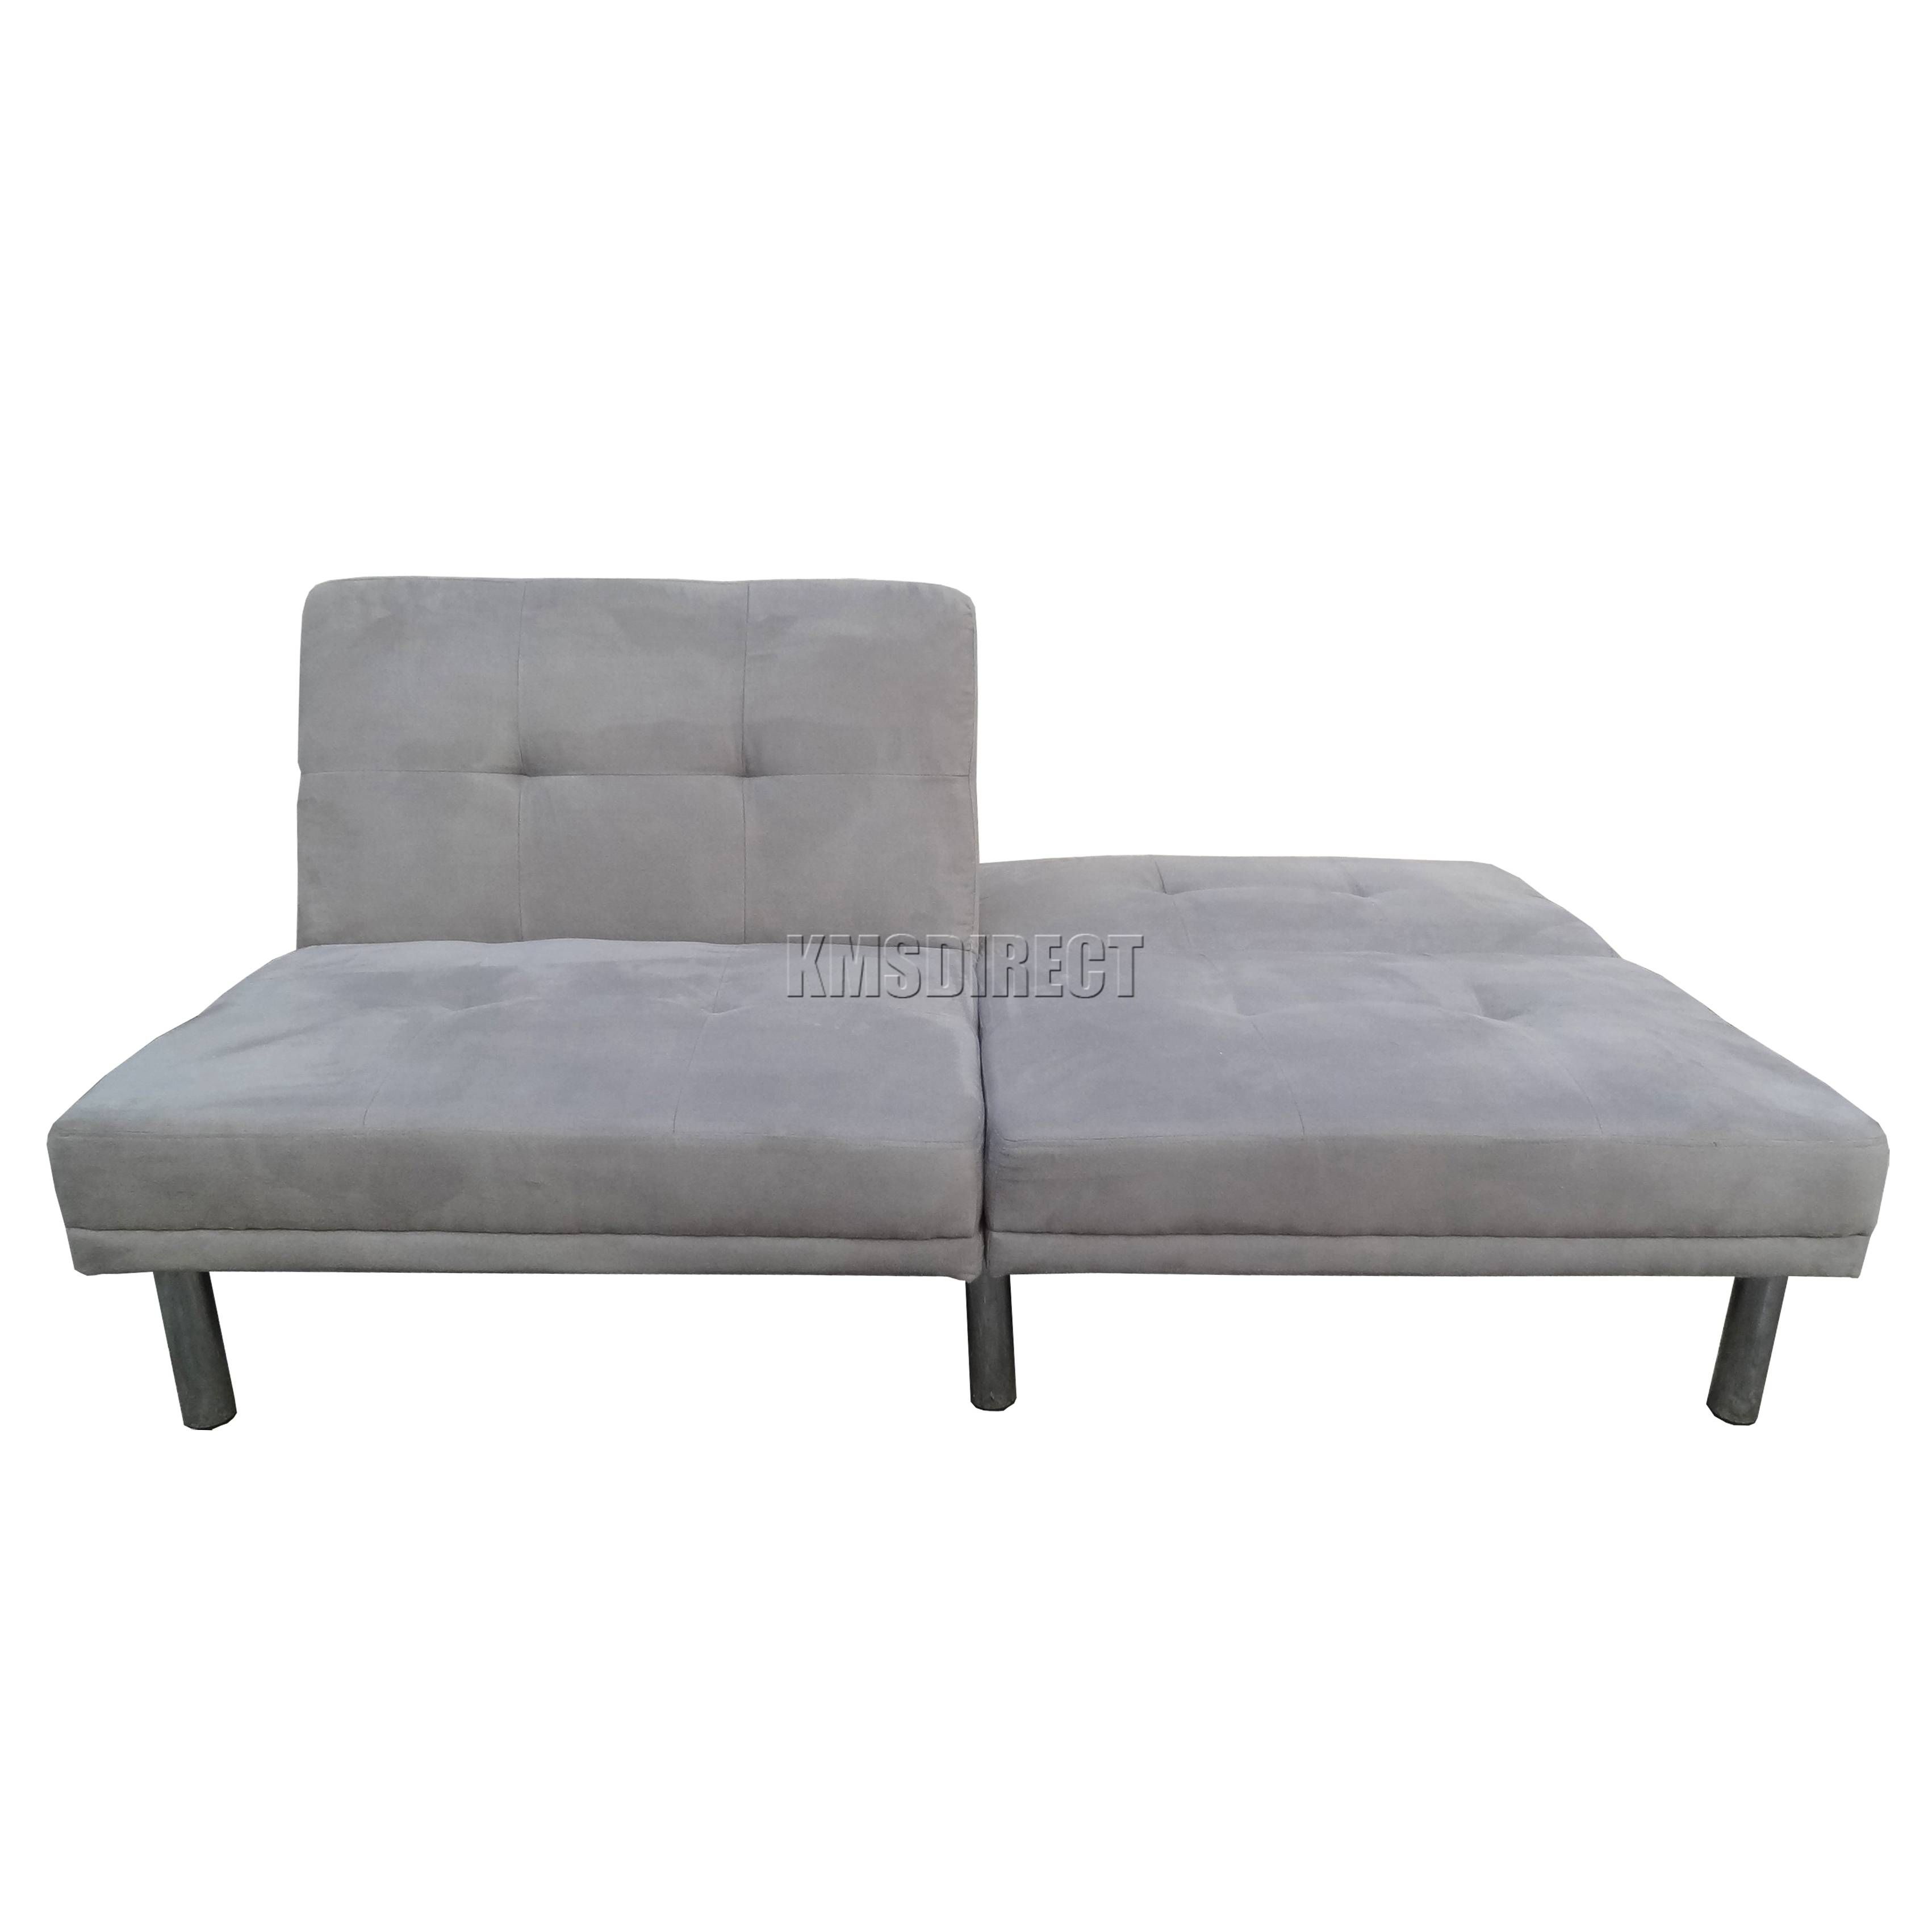 Foxhunter Fabric Faux Suede Sofa Bed Recliner 2 Seater Modern With Regard To Faux Suede Sofa Bed (View 12 of 25)